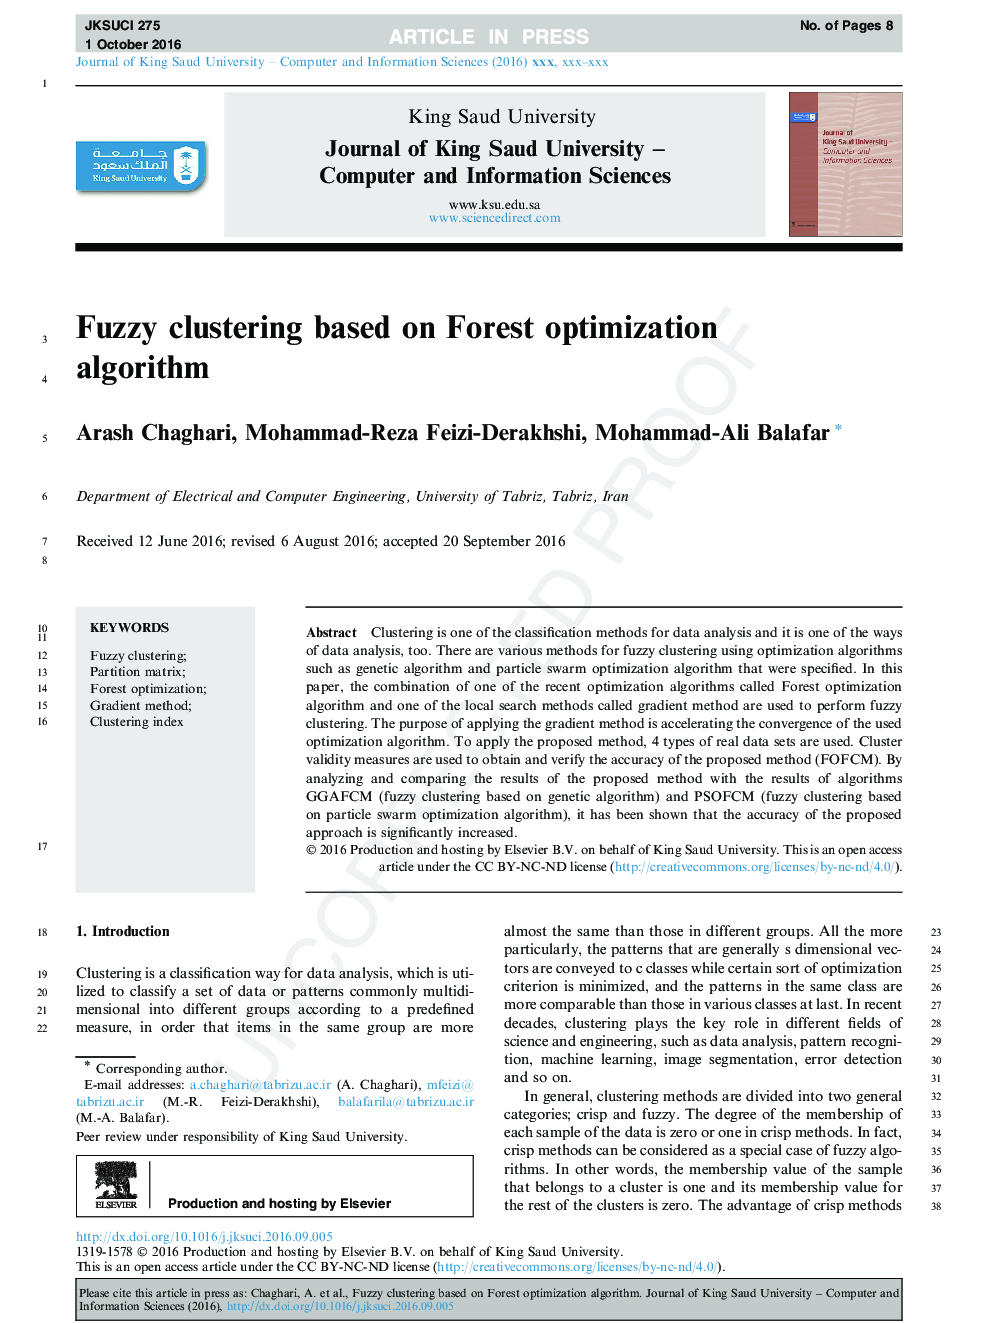 Fuzzy clustering based on Forest optimization algorithm